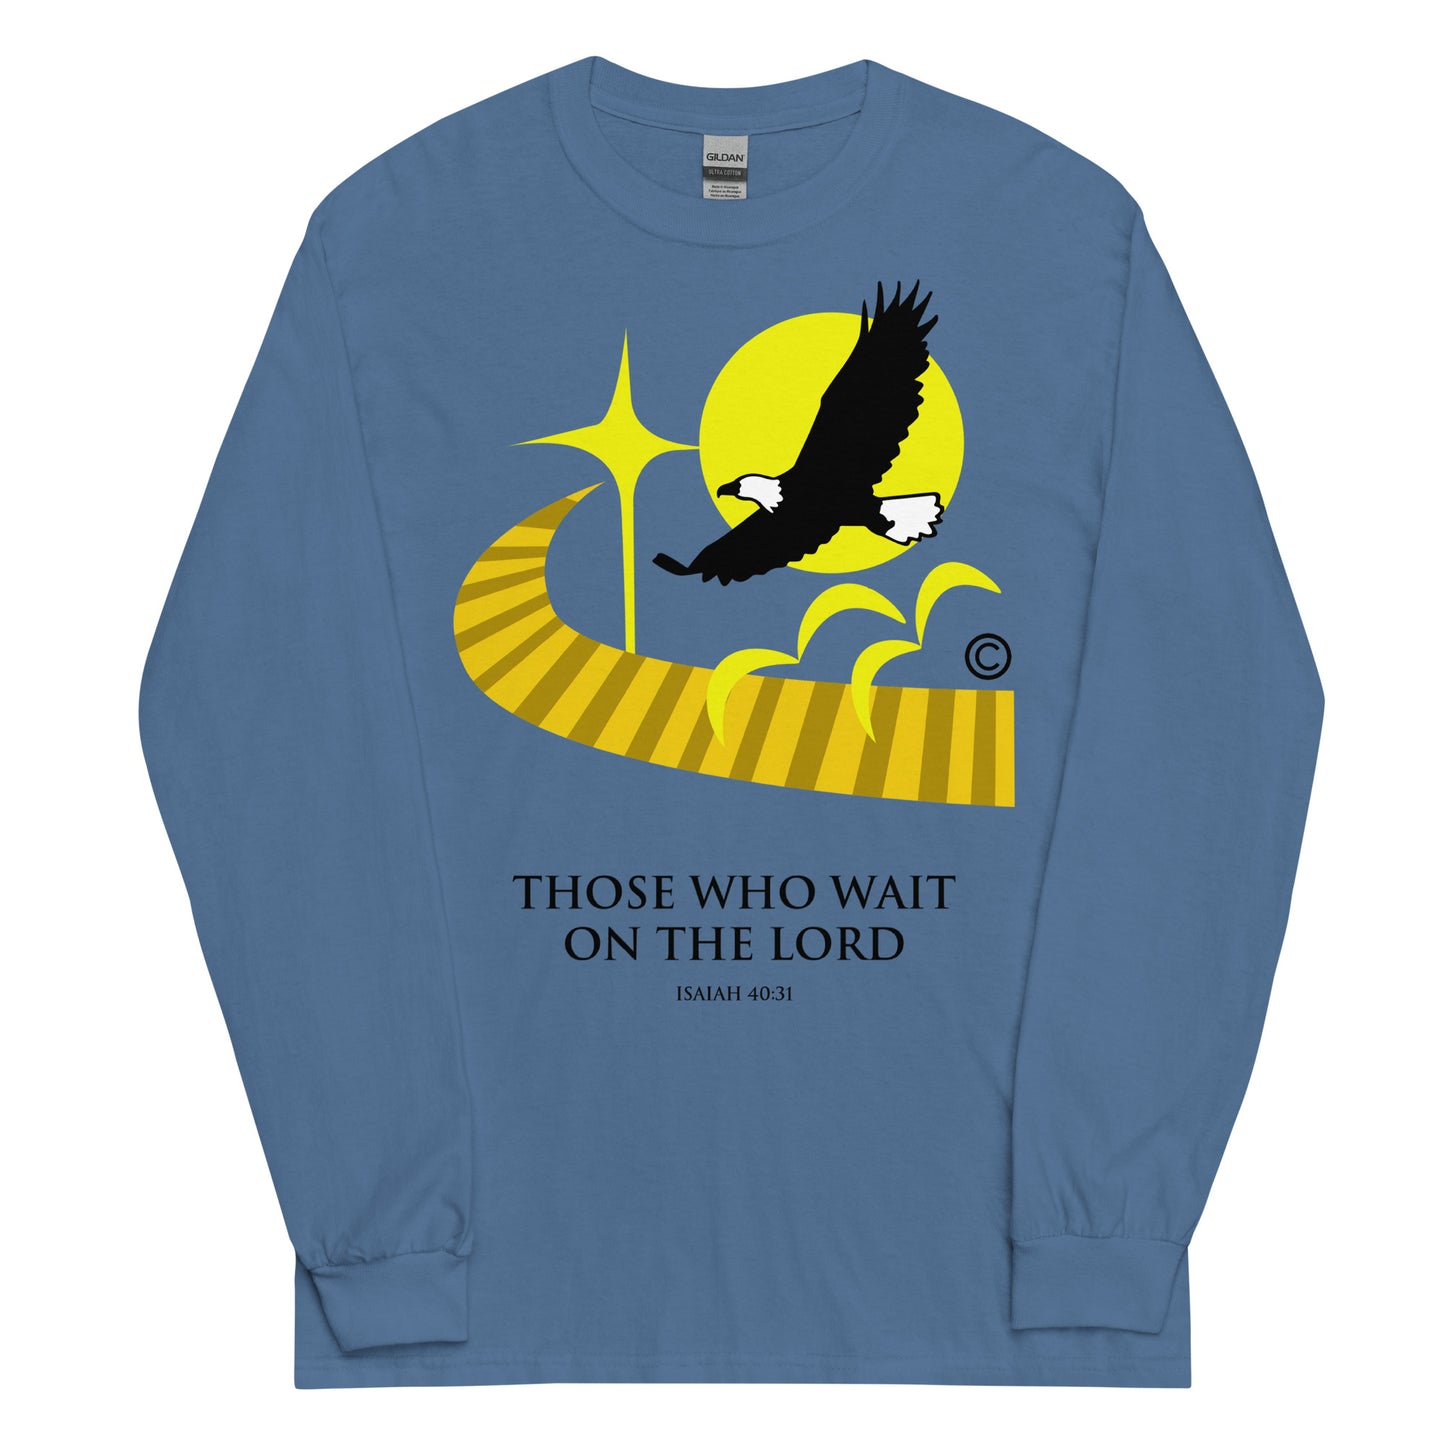 Those Who Wait on the Lord Men’s Long Sleeve Shirt